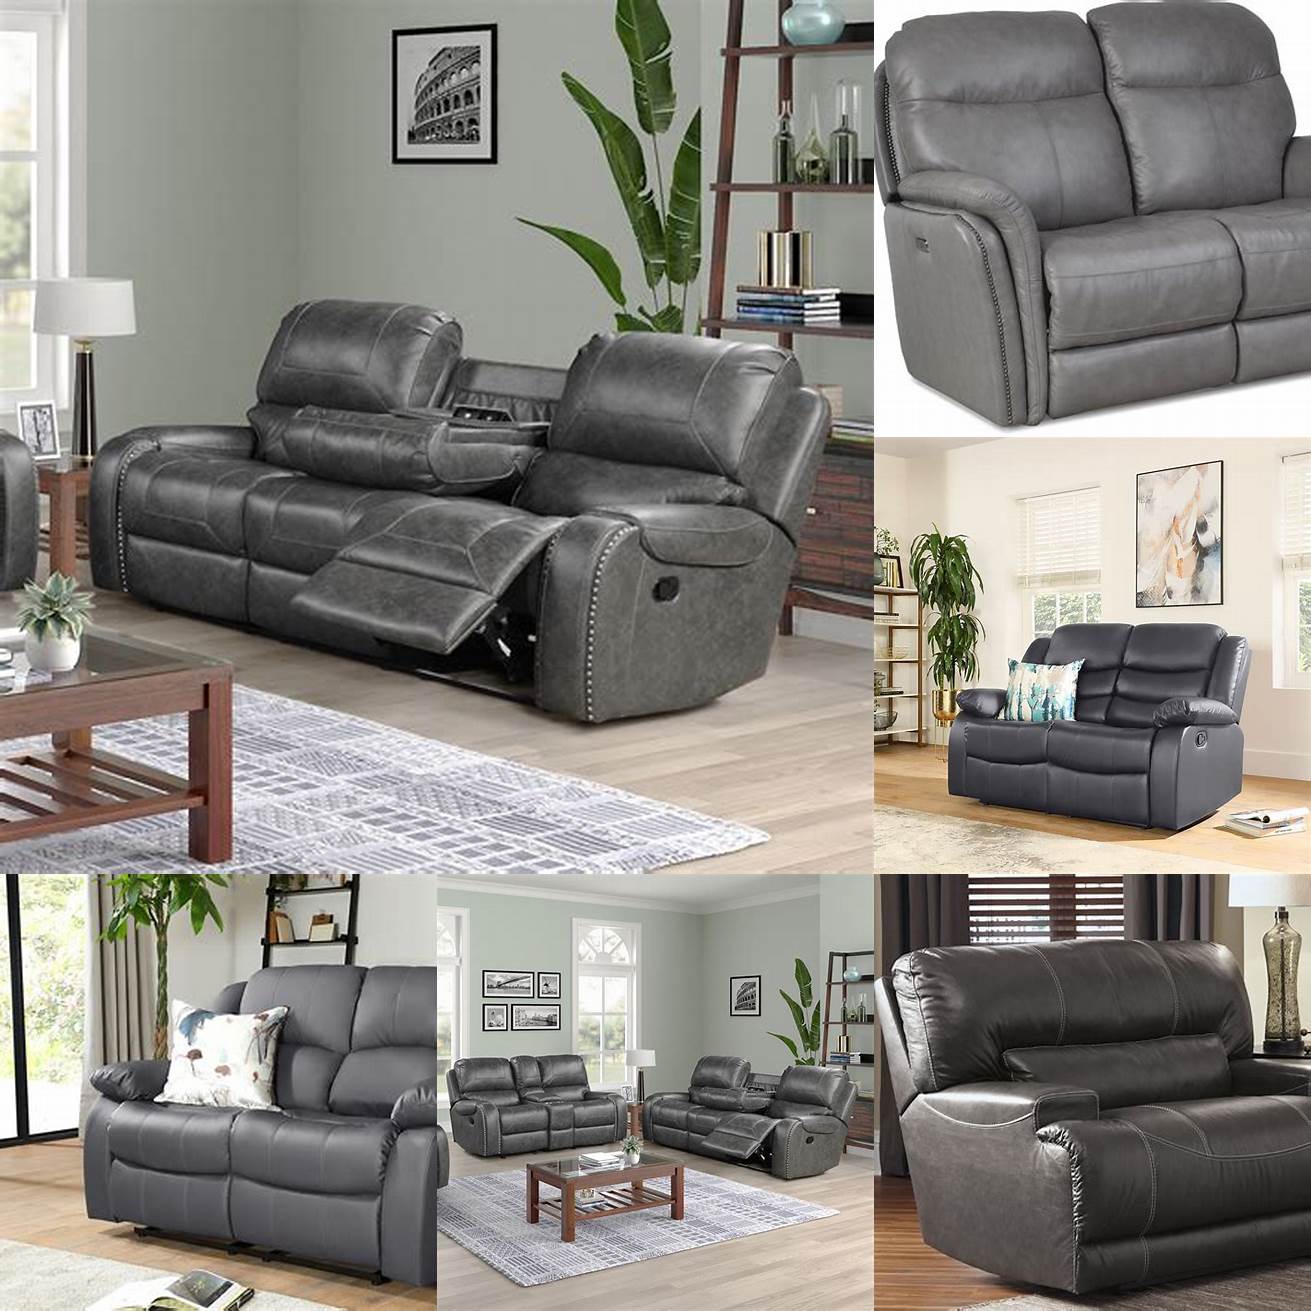 Grey leather recliner sofa